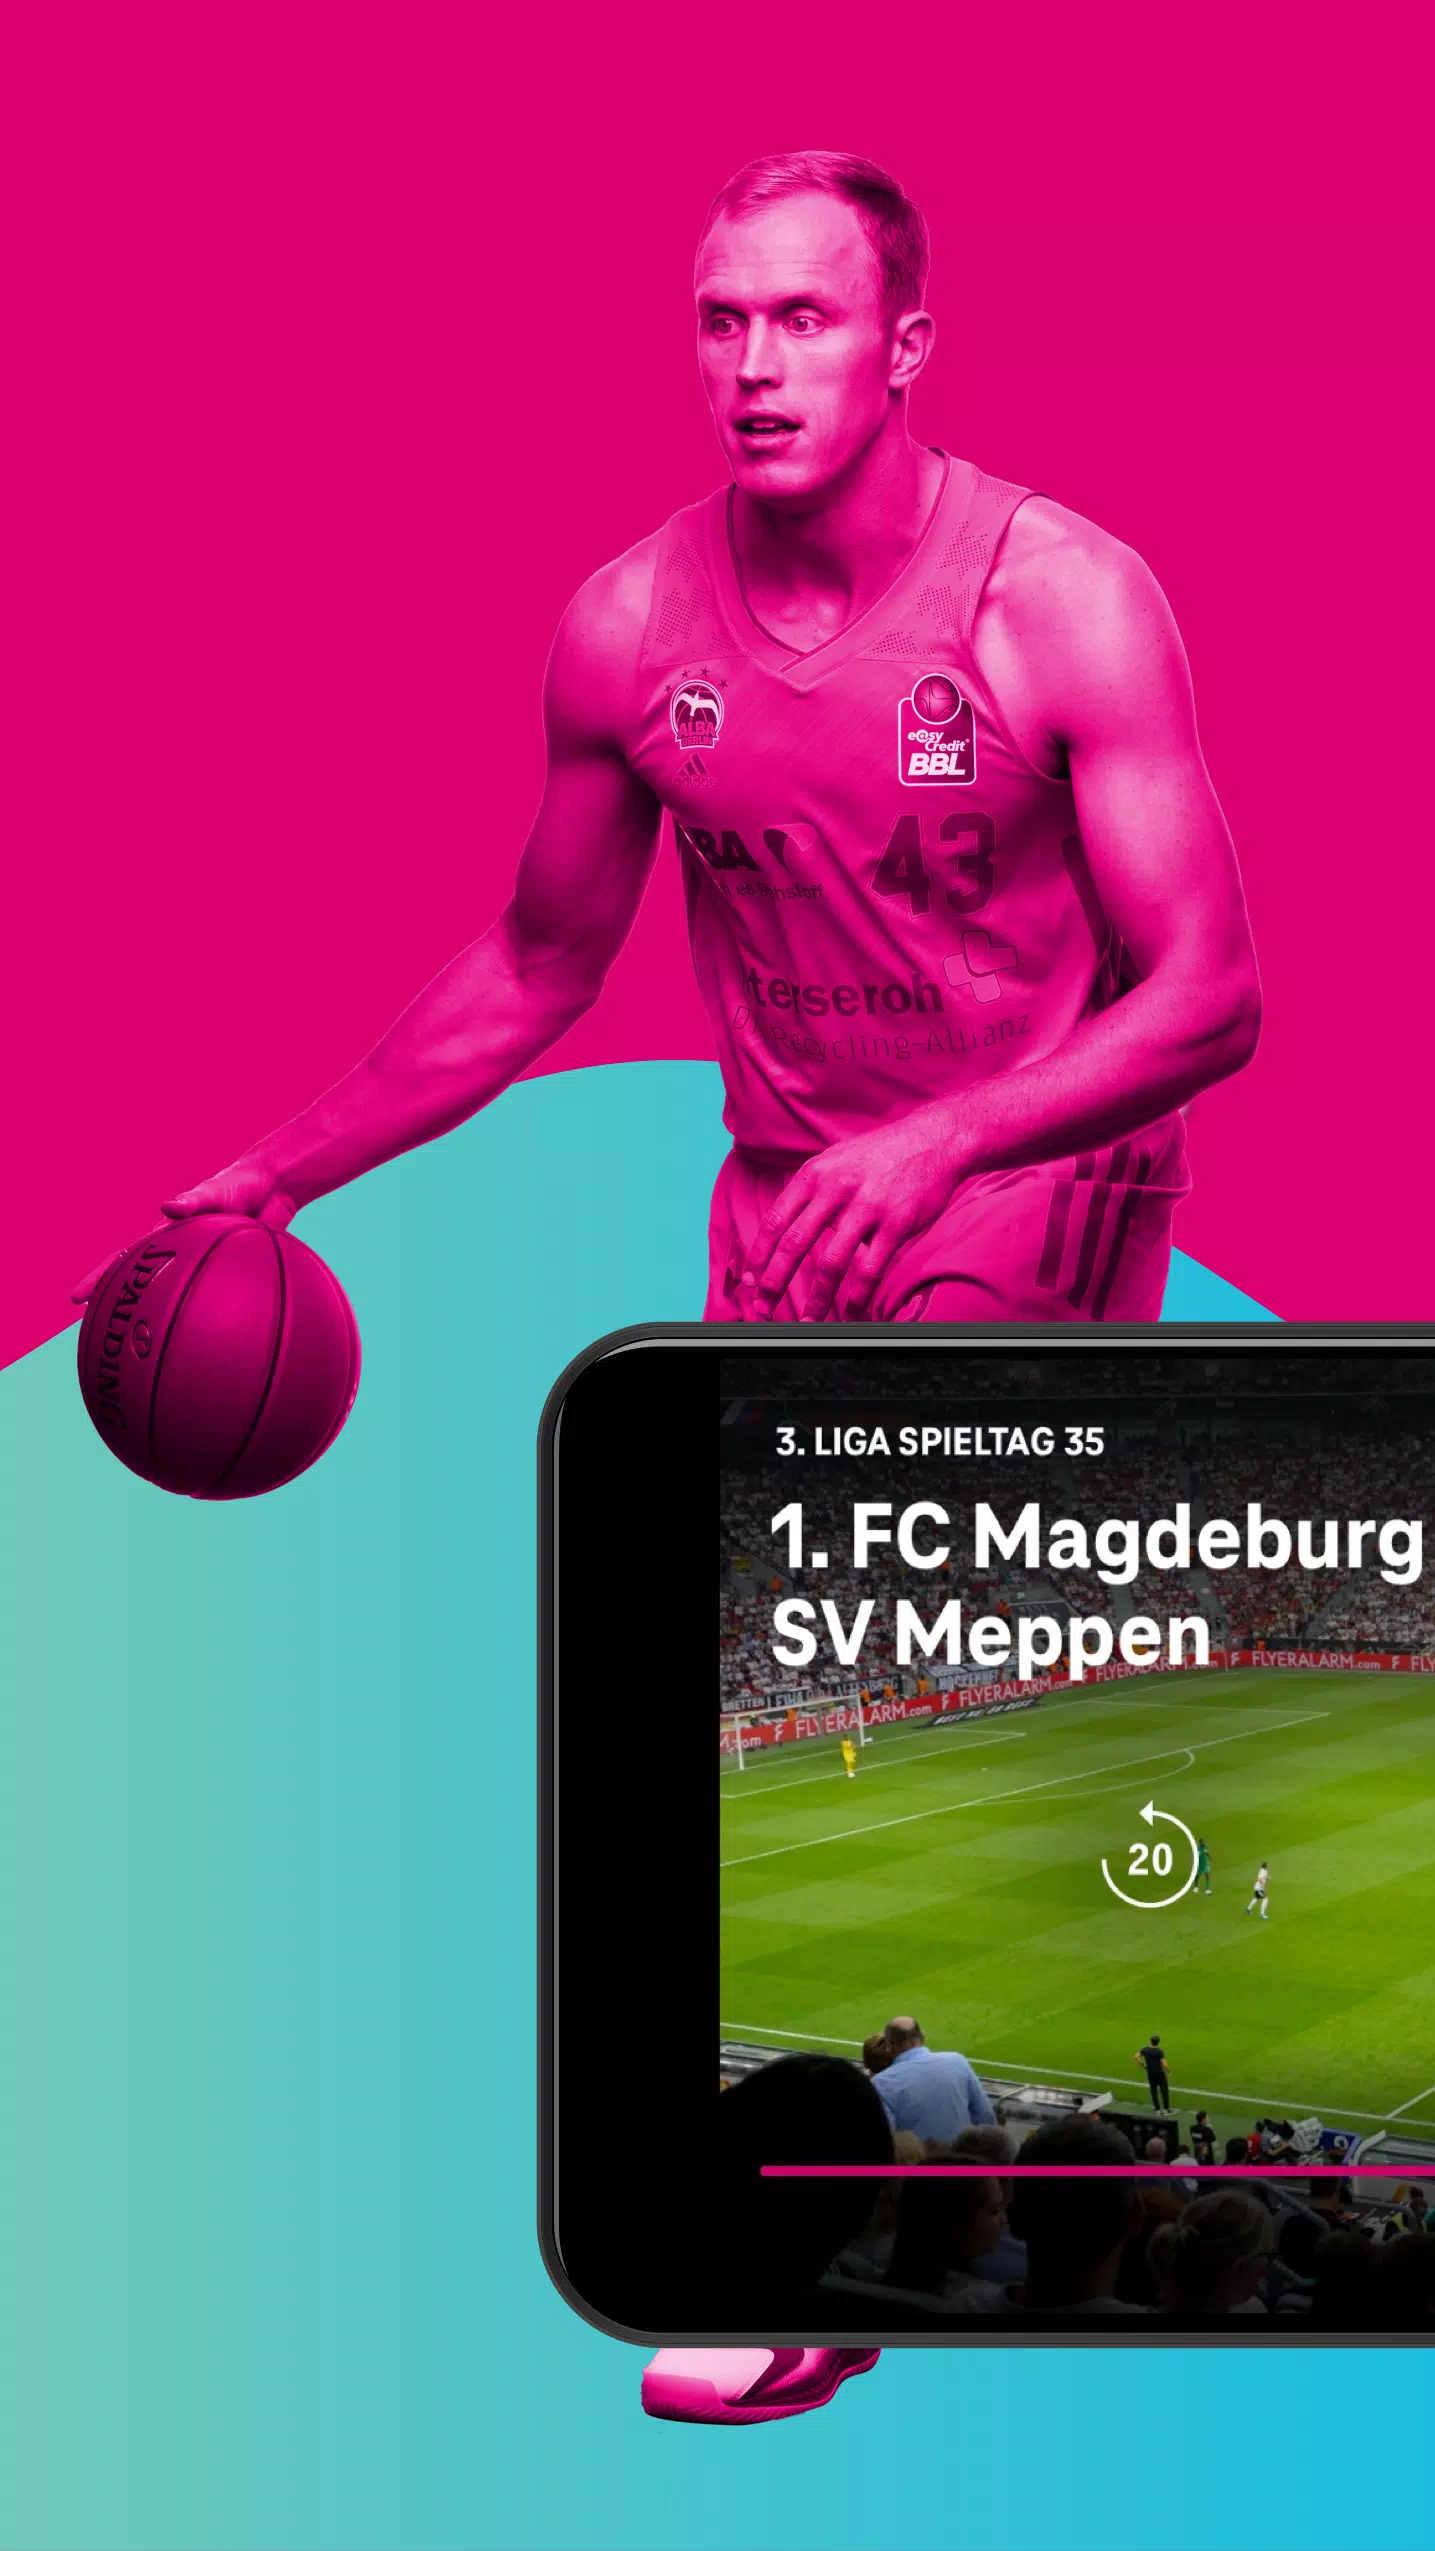 MagentaSport for Android - APK Download